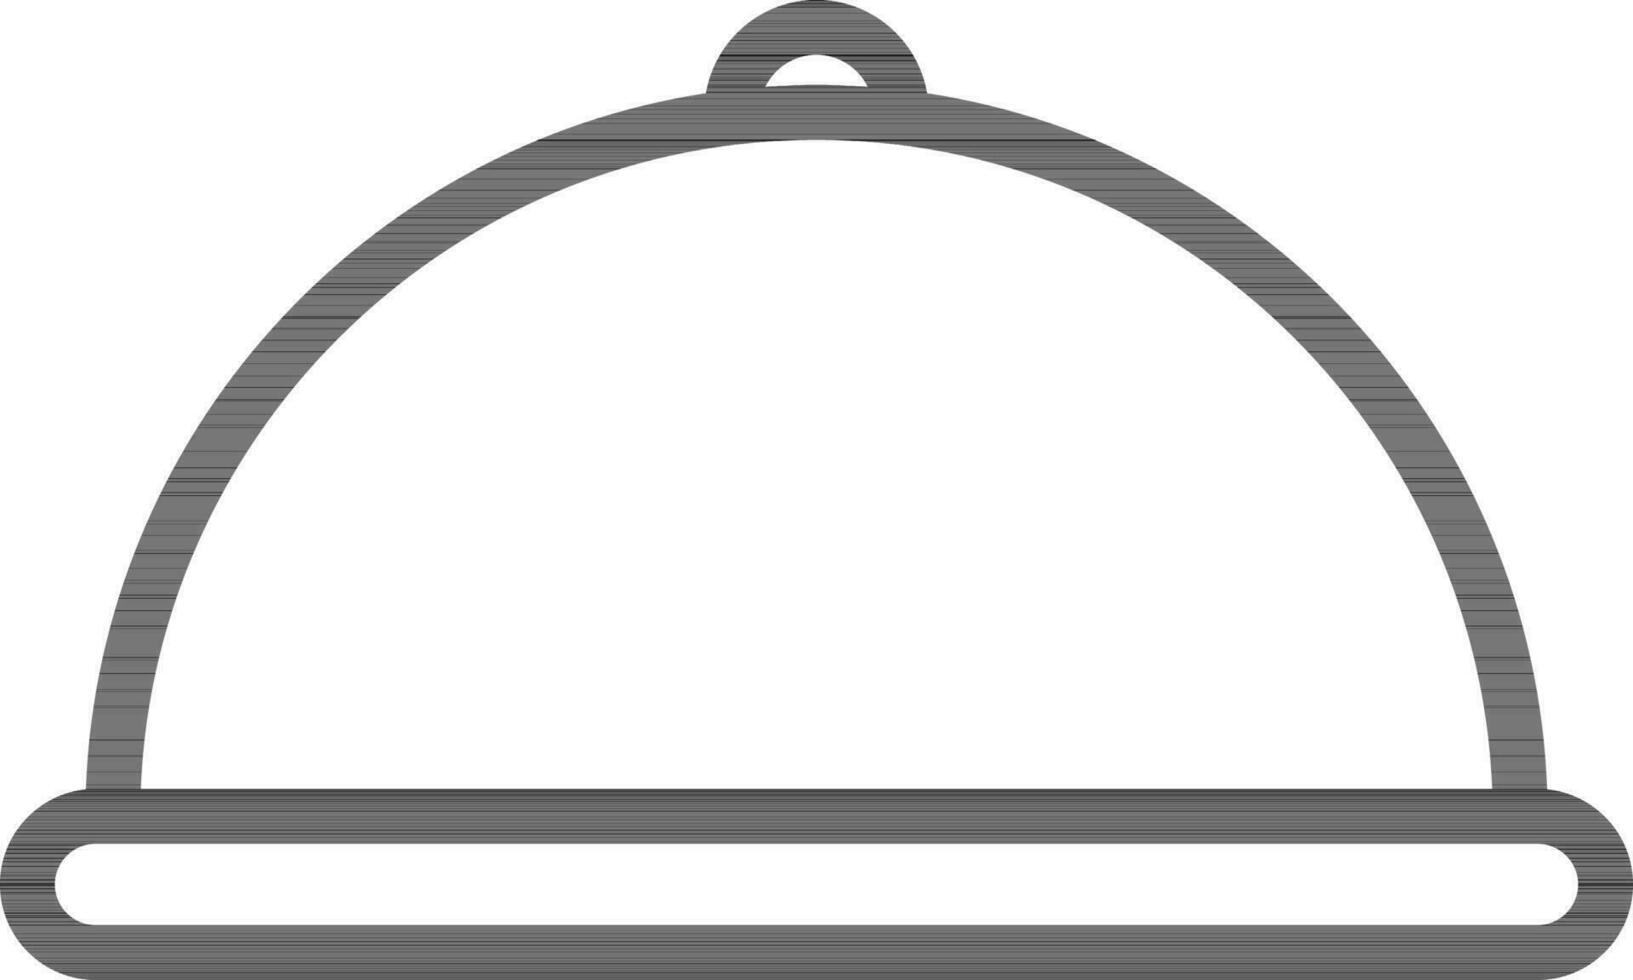 Line art Serving tray or Cloche icon in flat style. vector